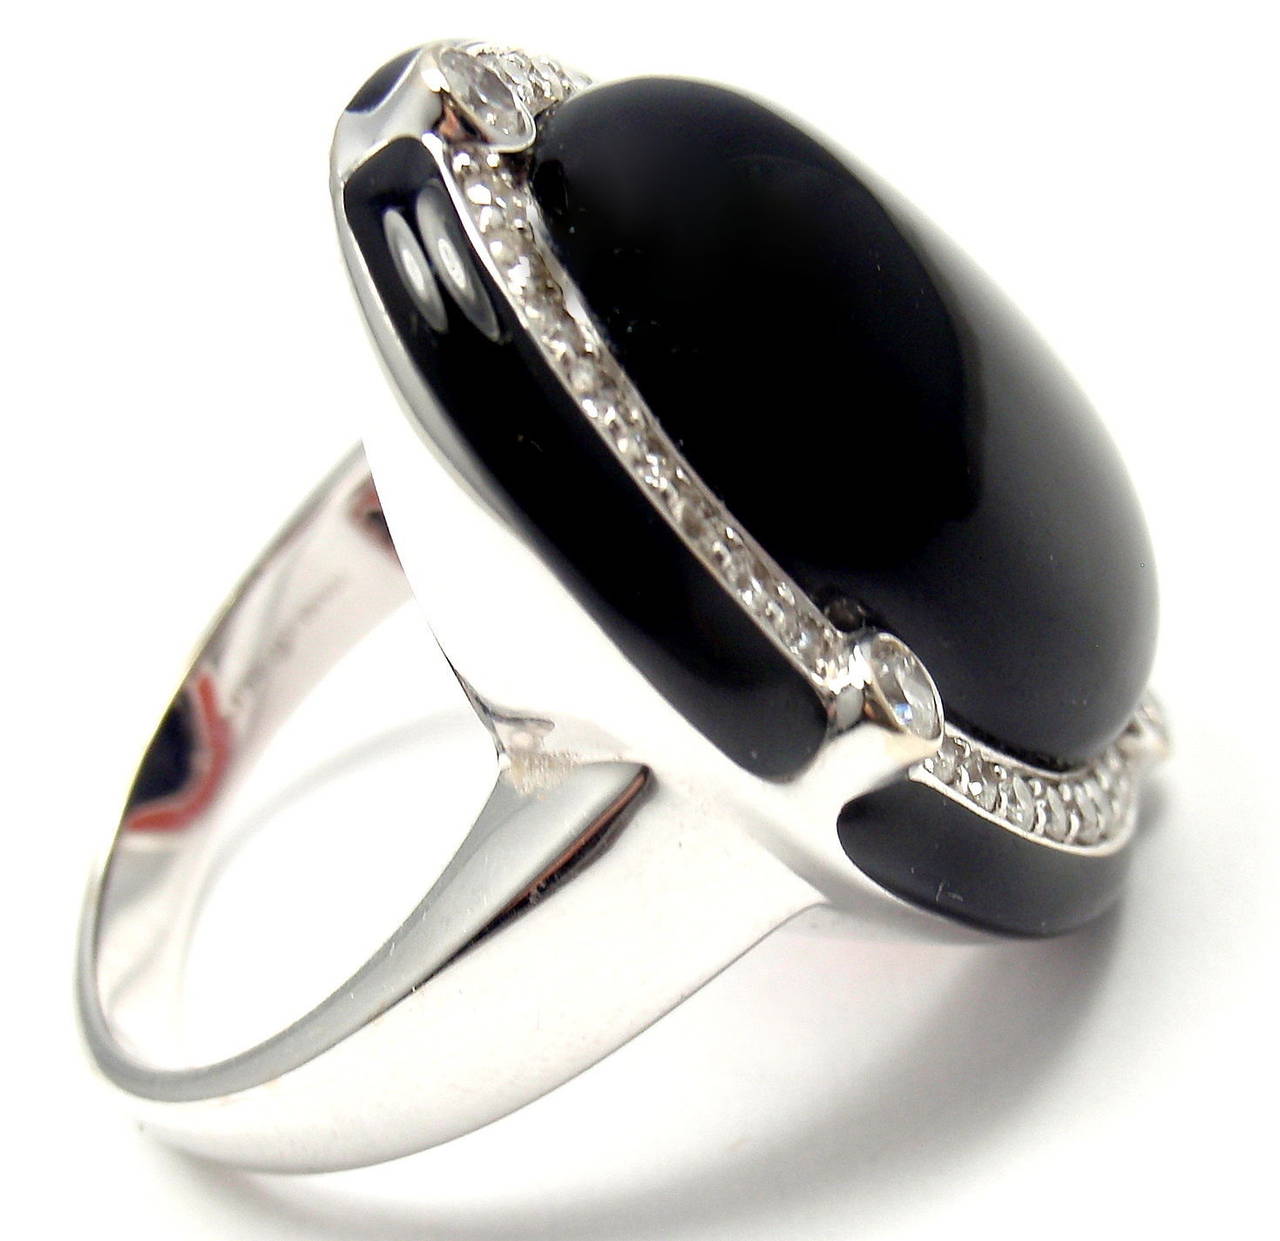 18k White Gold Diamond Large Black Onyx Ring by Ivanka Trump.
With 36 Round Brilliant cut diamonds .75ct VS clarity, G color
1 Oval shape large black onyx stone 20mm x 16mm

Details:
Ring Size: 7 3/4 (resizing is available)
Weight: 15.1